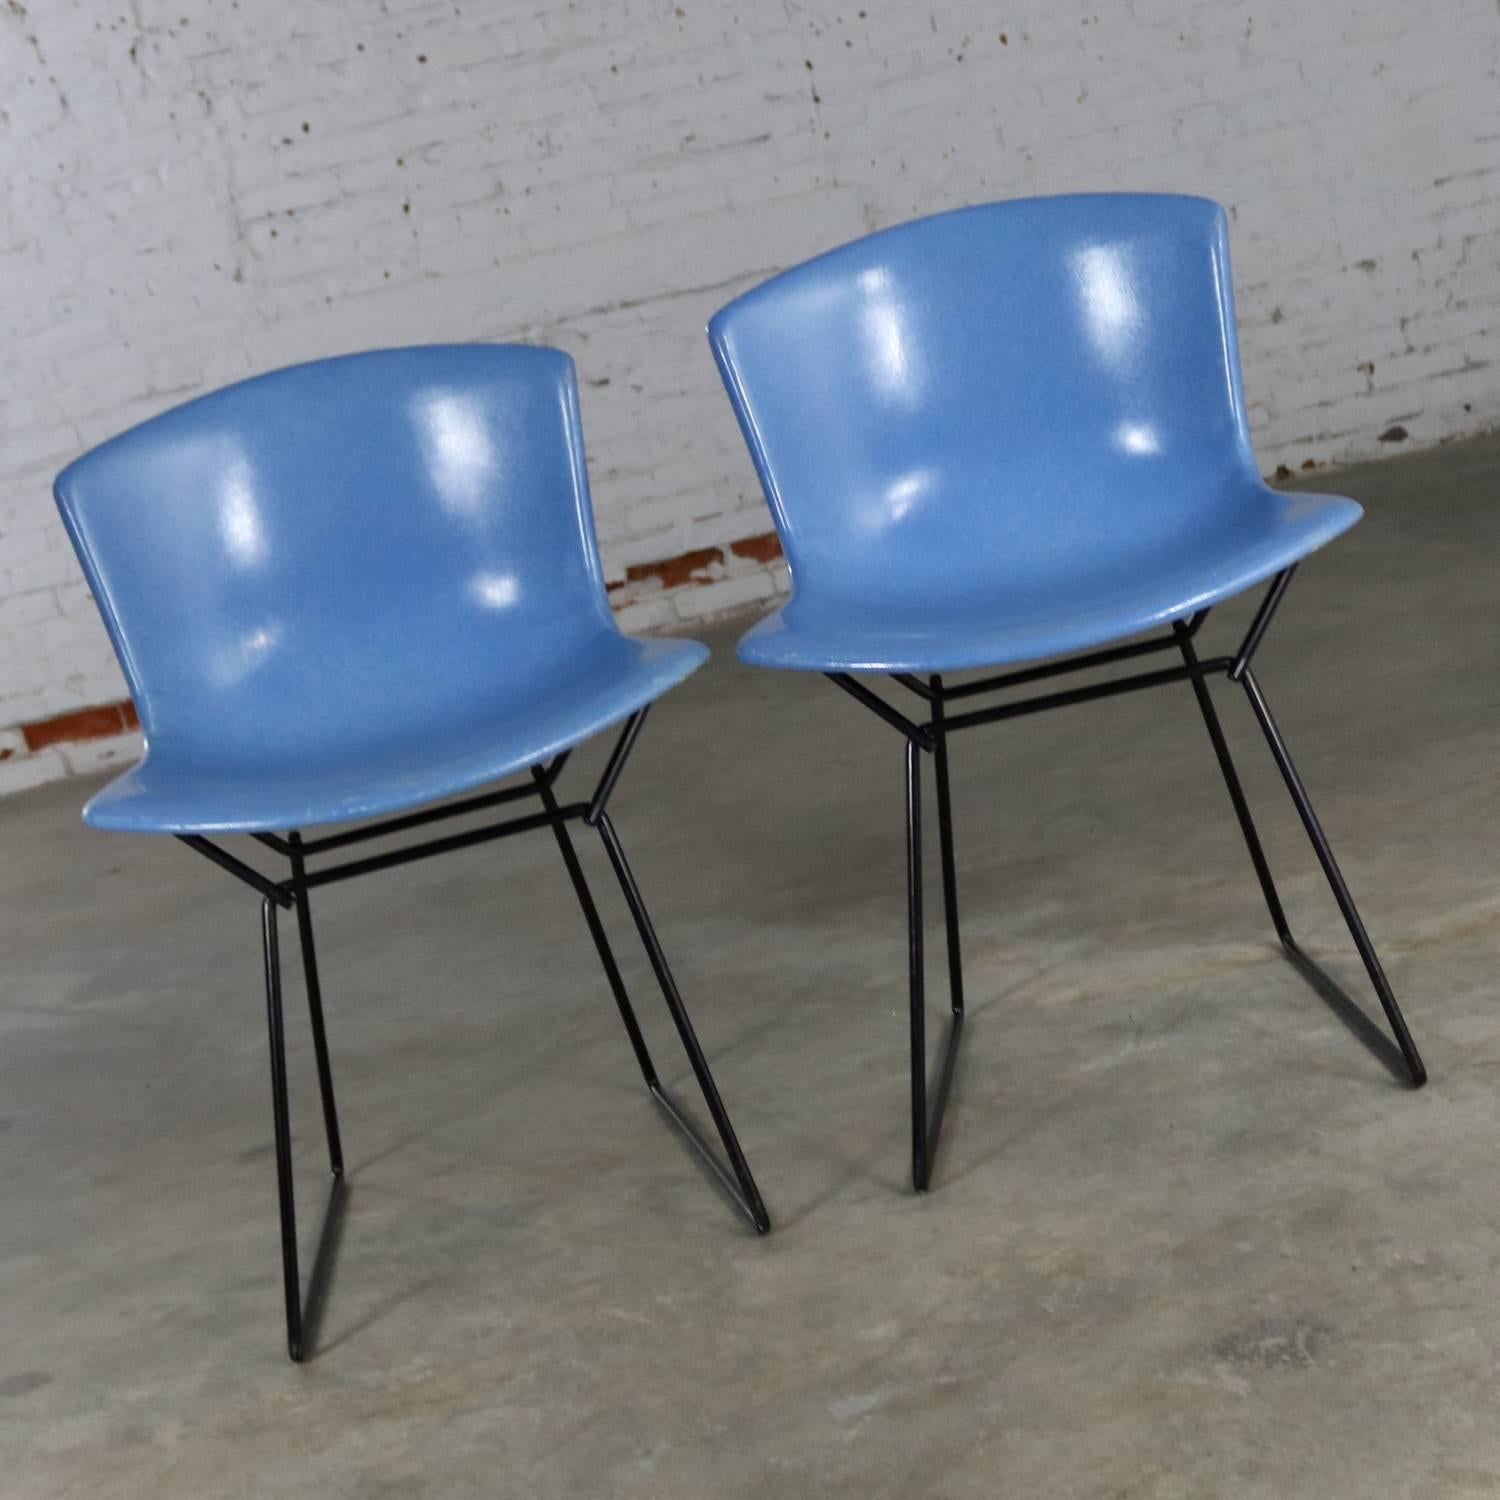 American Pair of Harry Bertoia for Knoll Blue Fiberglass Side Chairs Black Wire Base